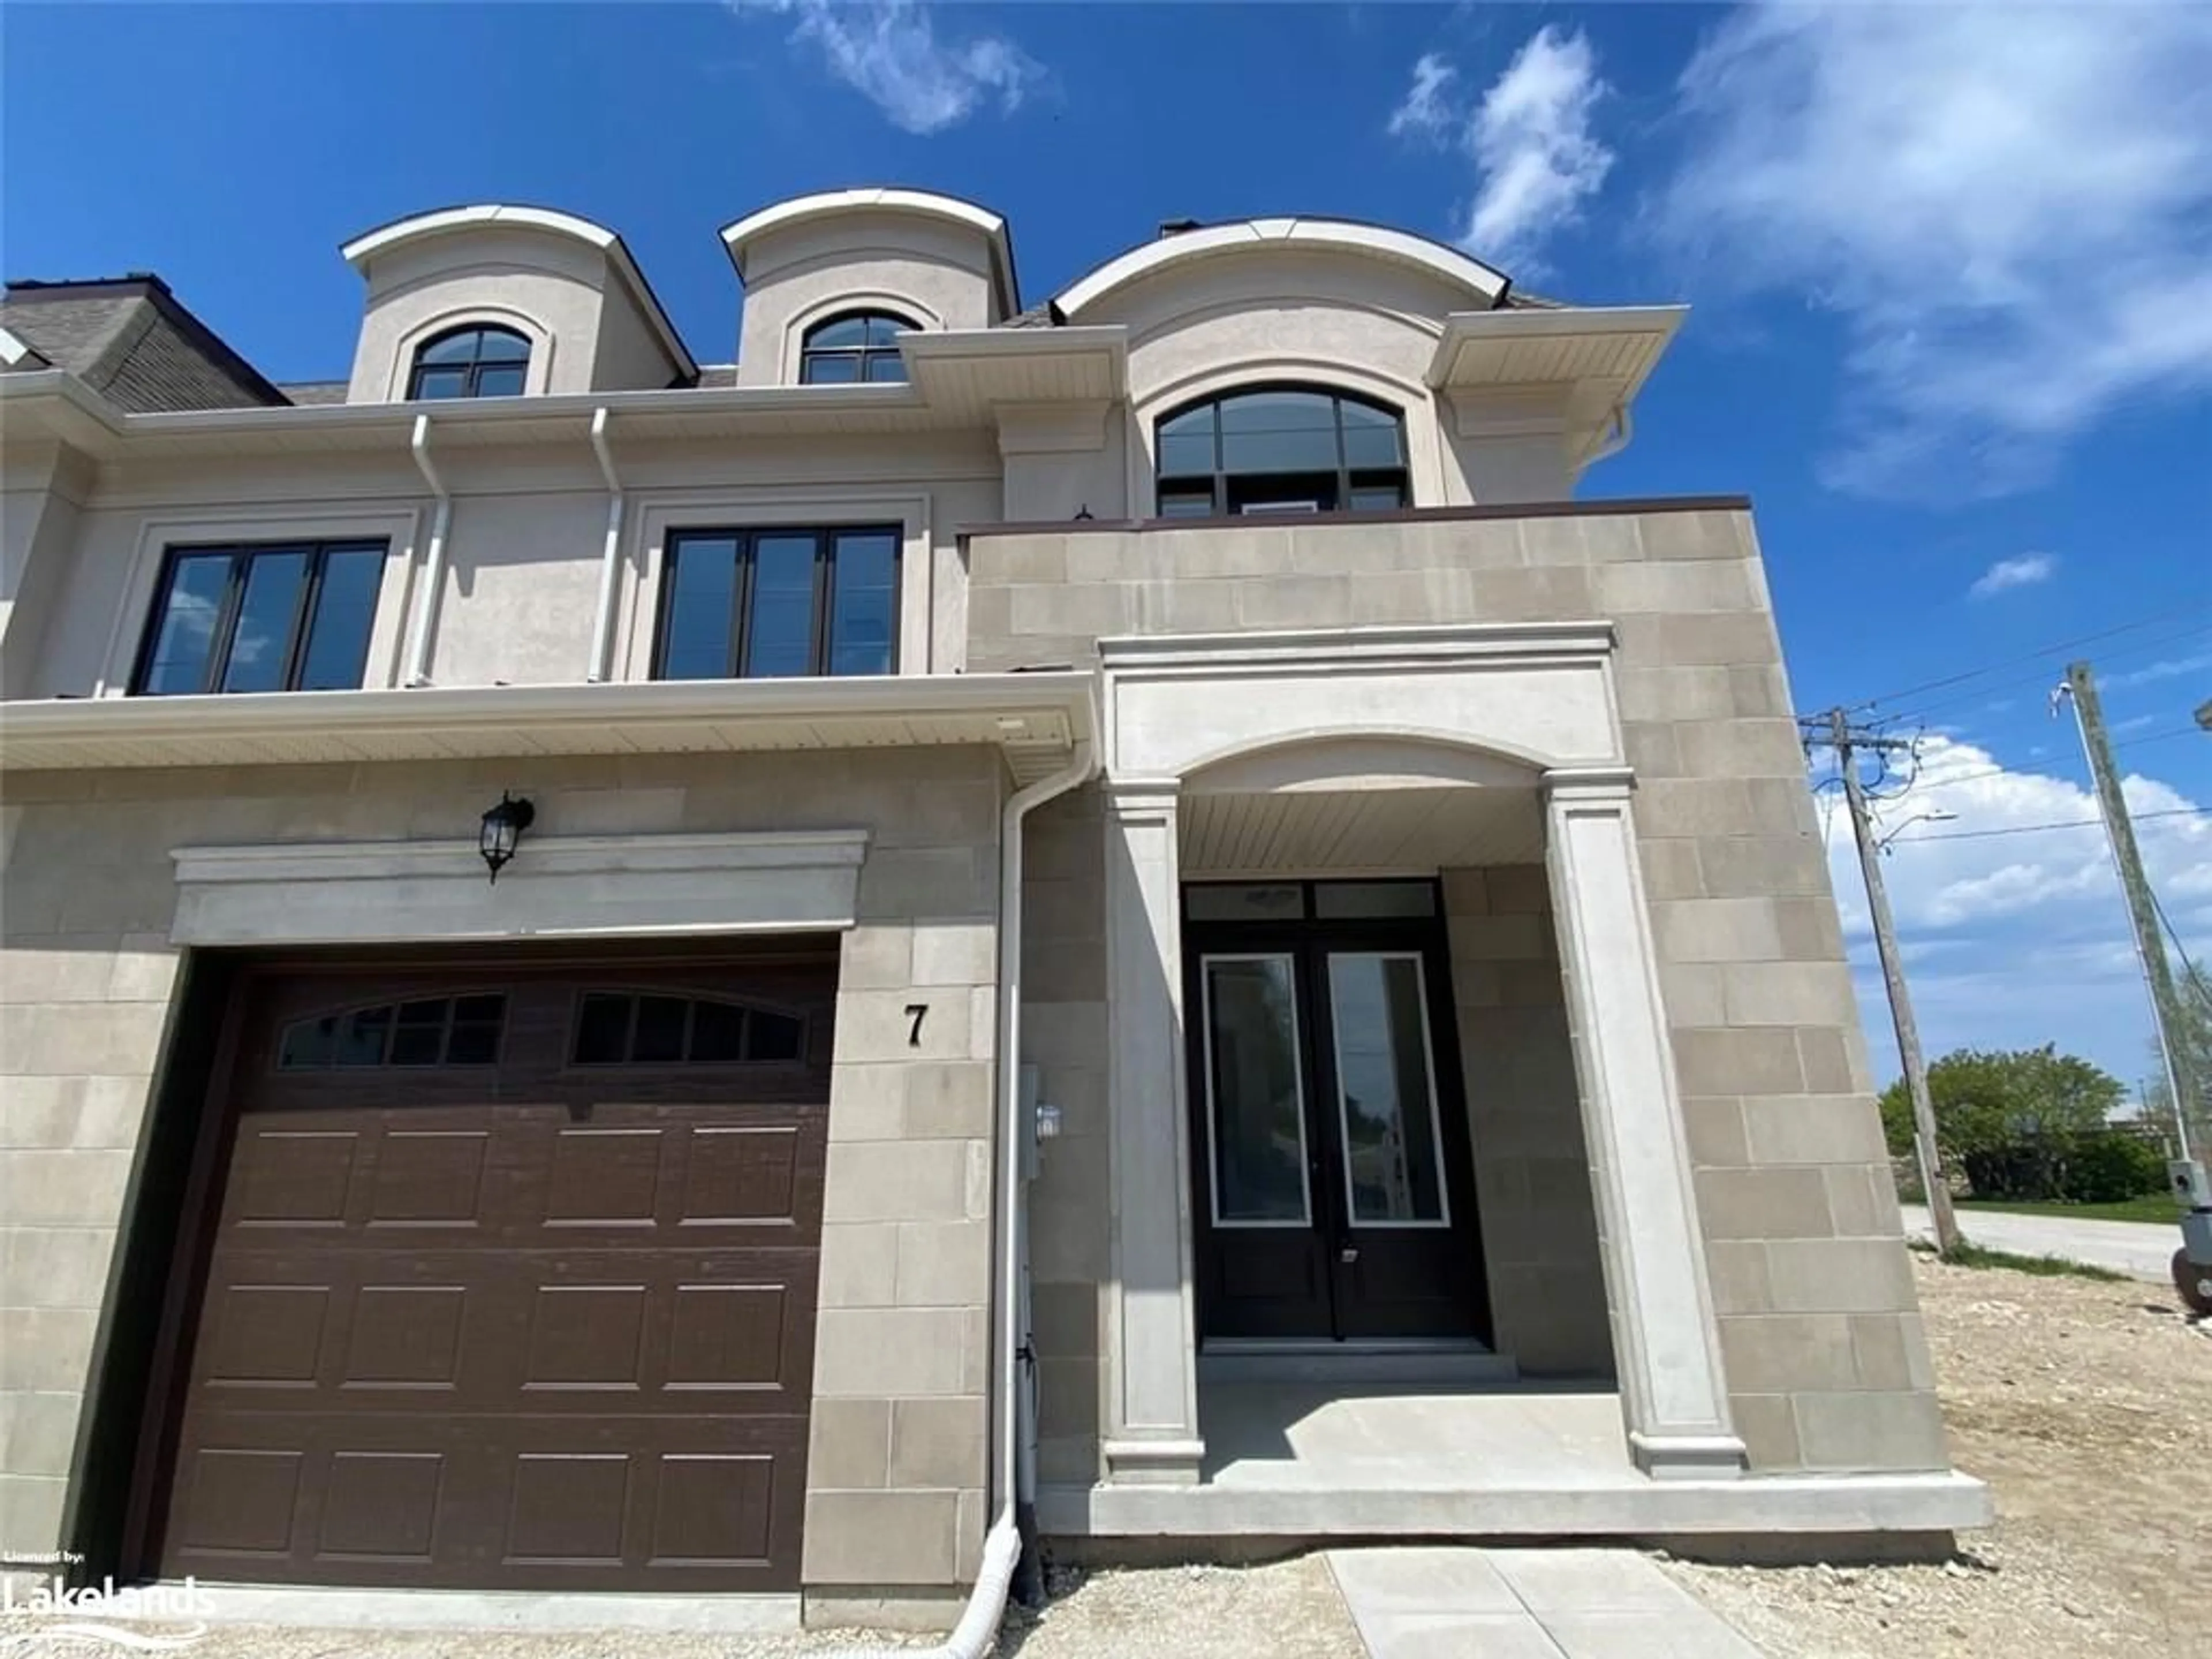 Home with brick exterior material for 11 Bay St #7, Thornbury Ontario N0H 2P0